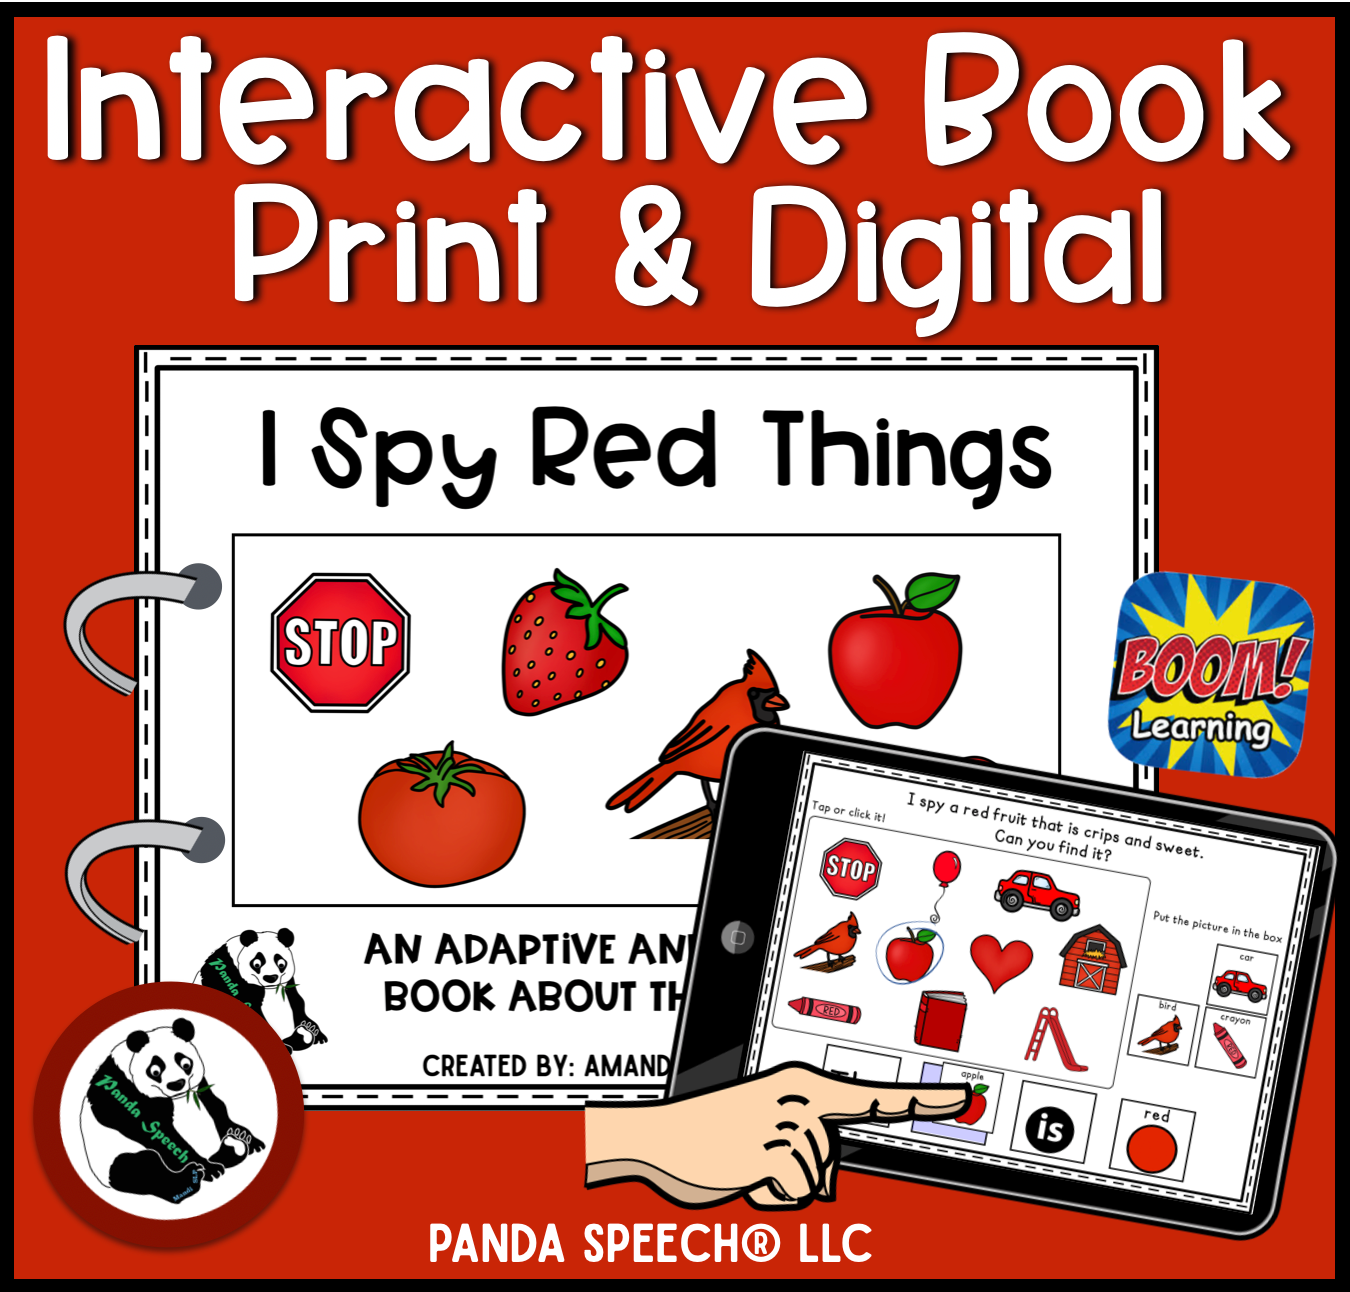 I Spy RED Things! Color Series Print & Make Books (includes a digital BOOM Card book)